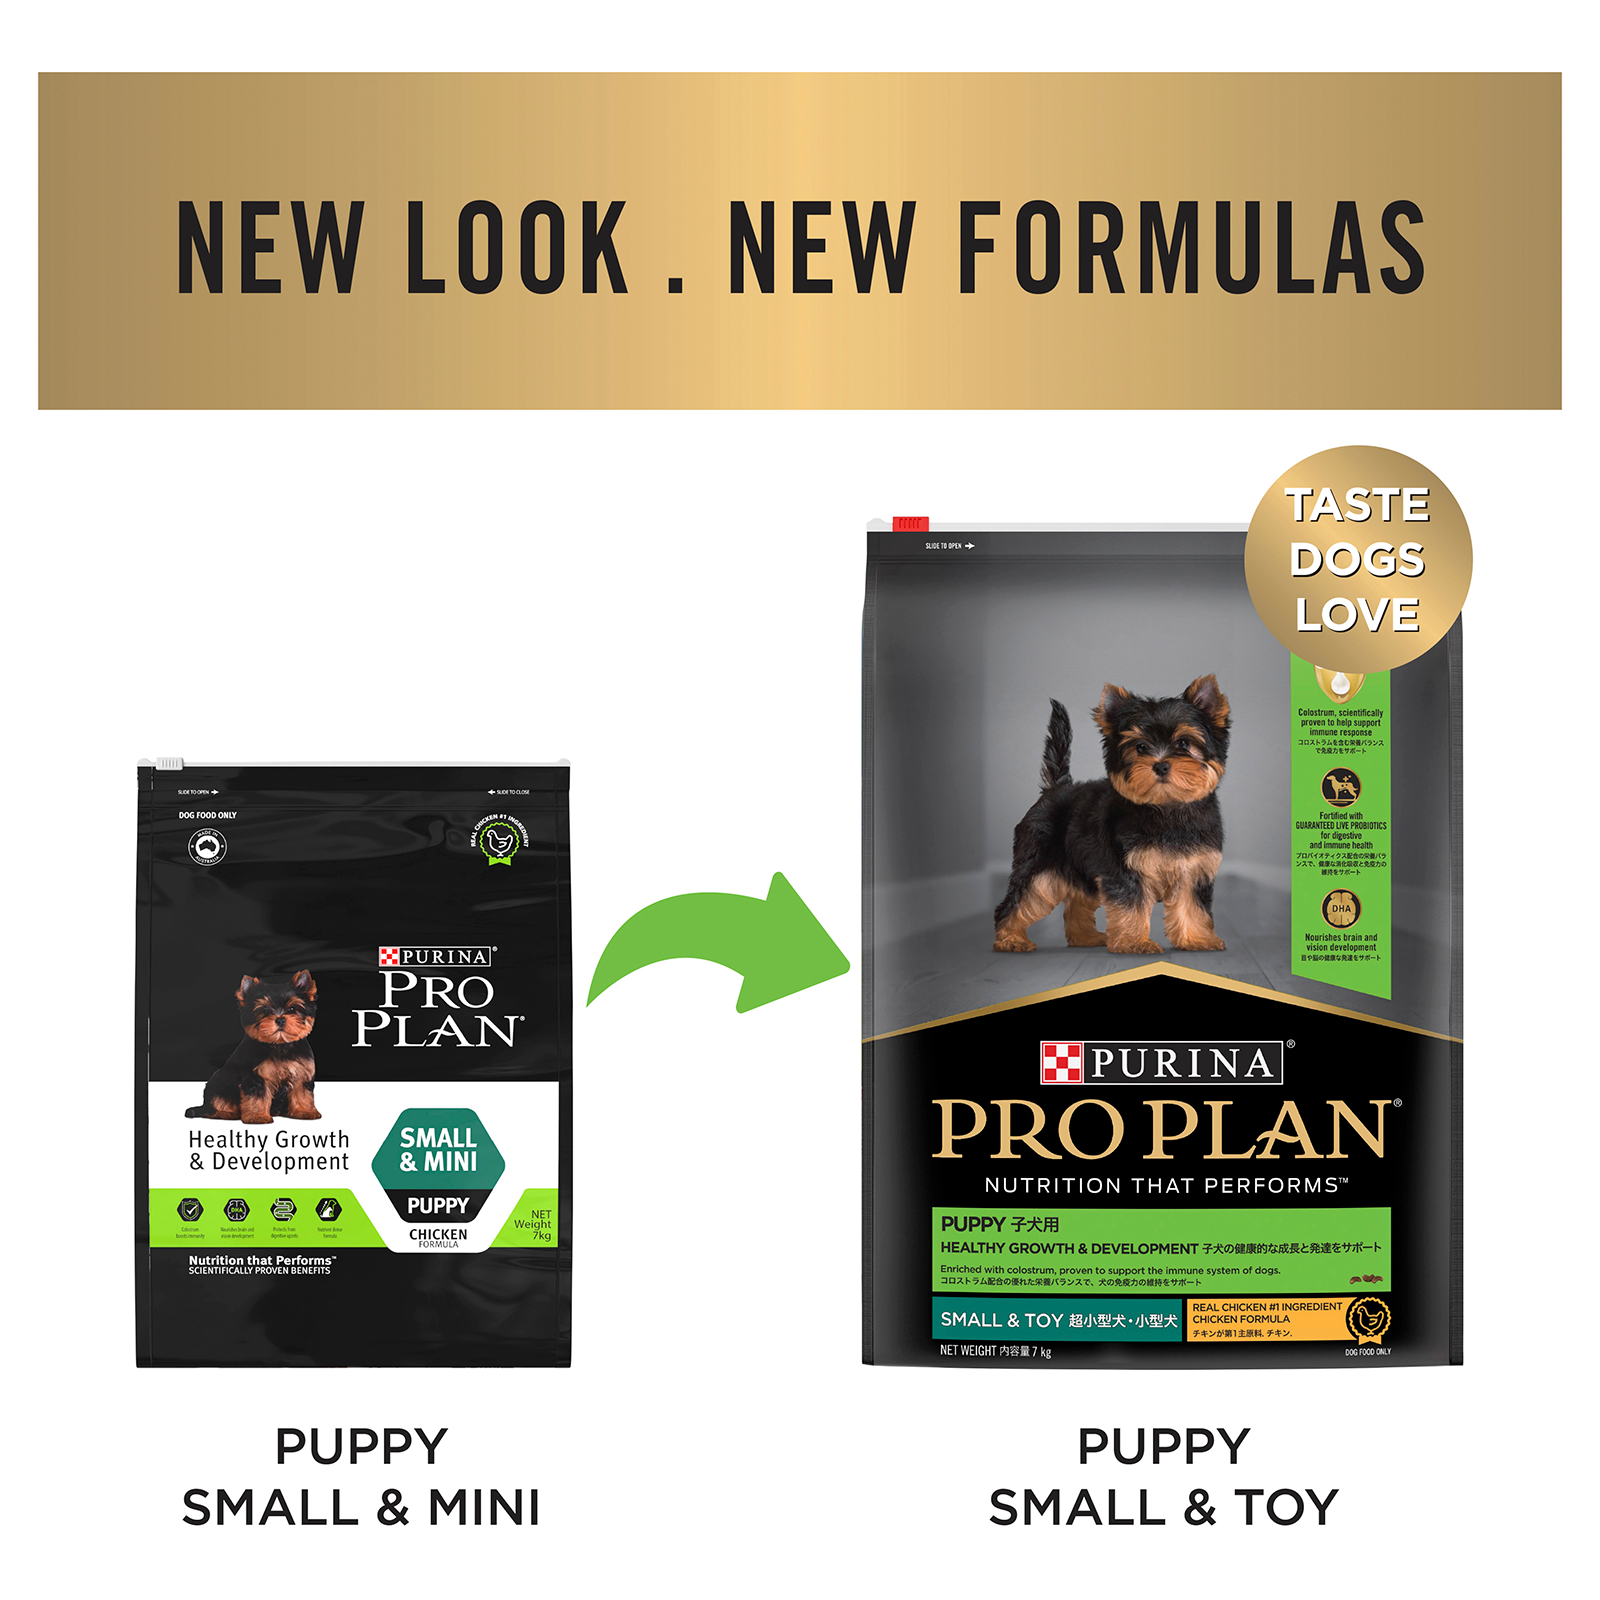 Pro Plan Dog Food Puppy Small & Toy Breed